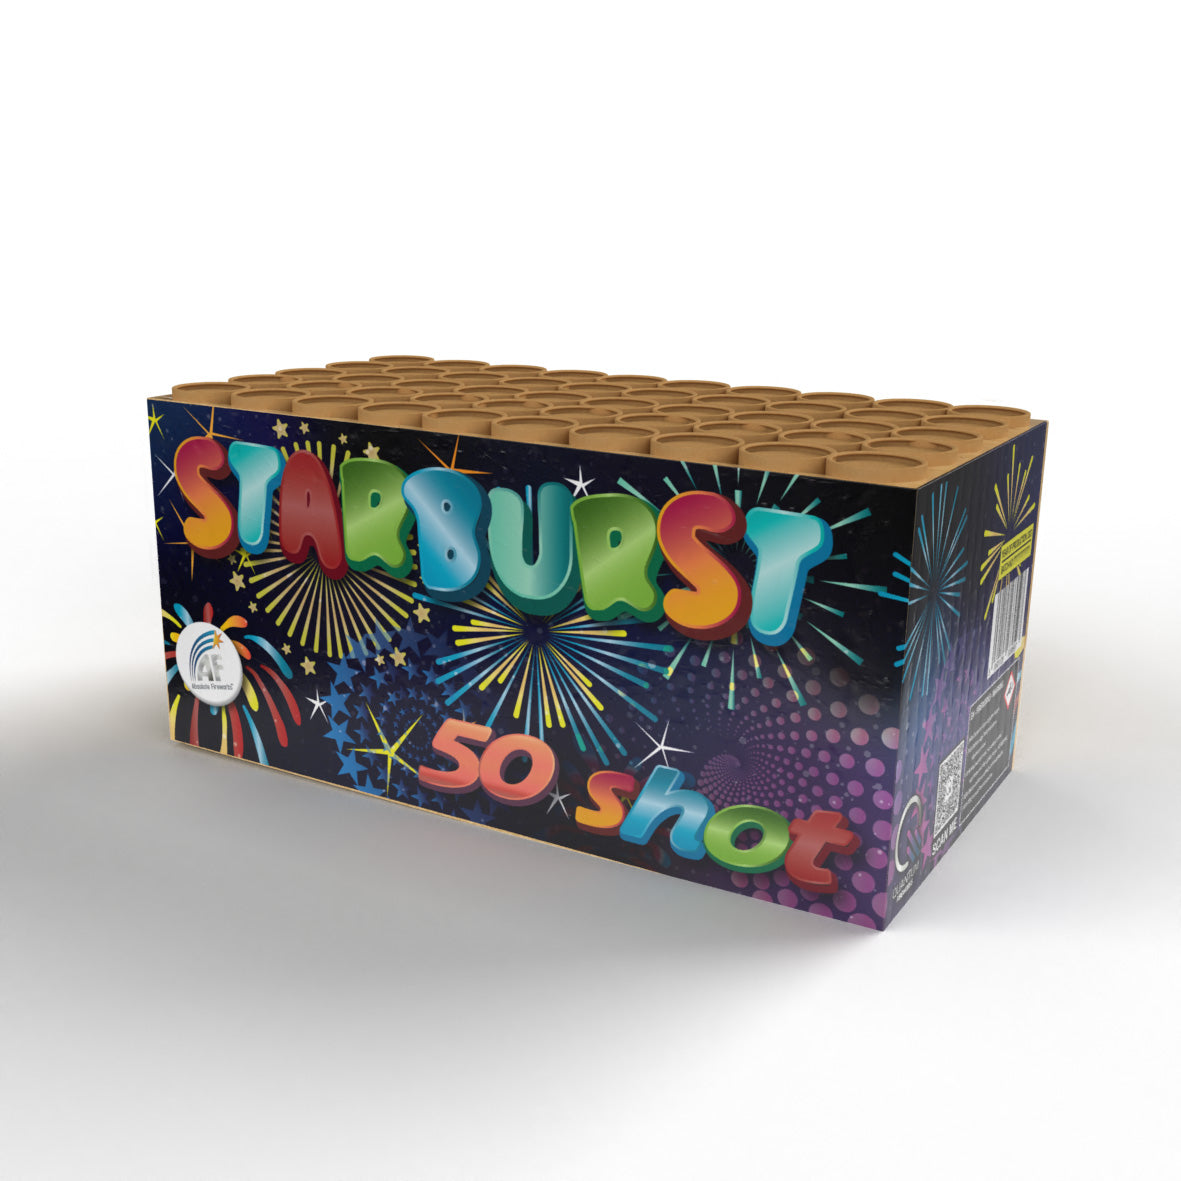 Starburst by Absolute Fireworks